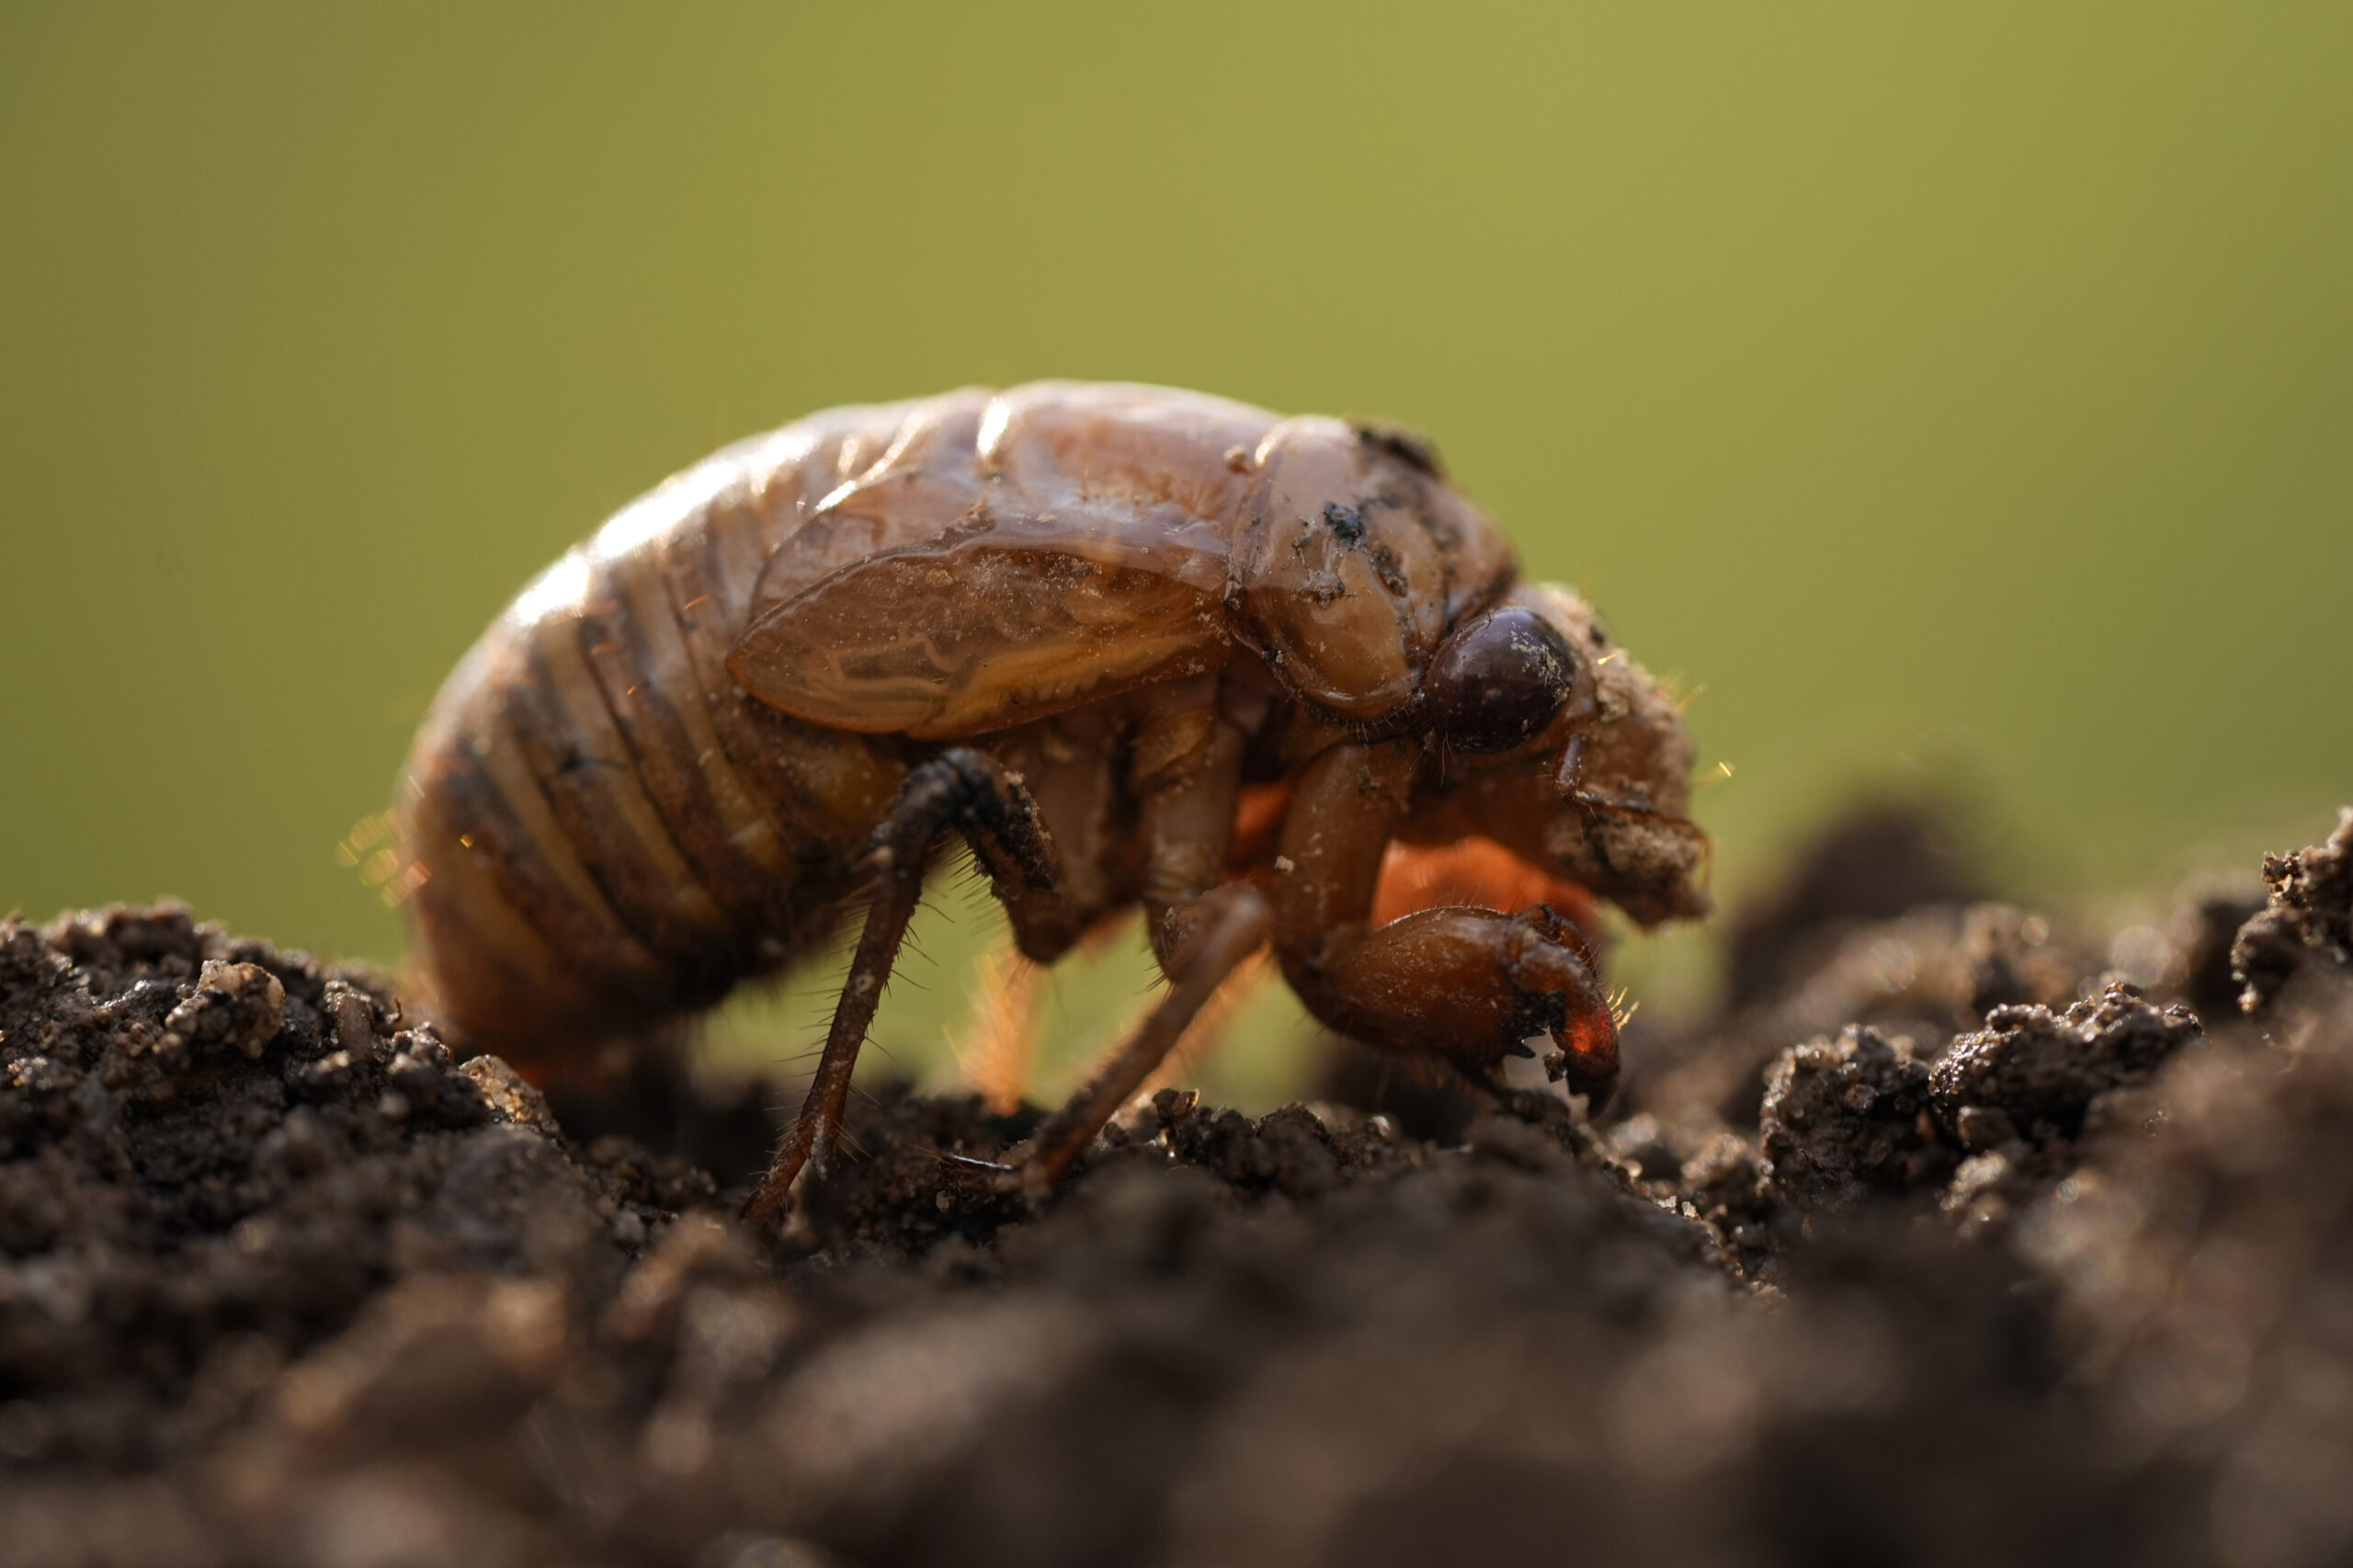 Insect update: Return of the cicadas